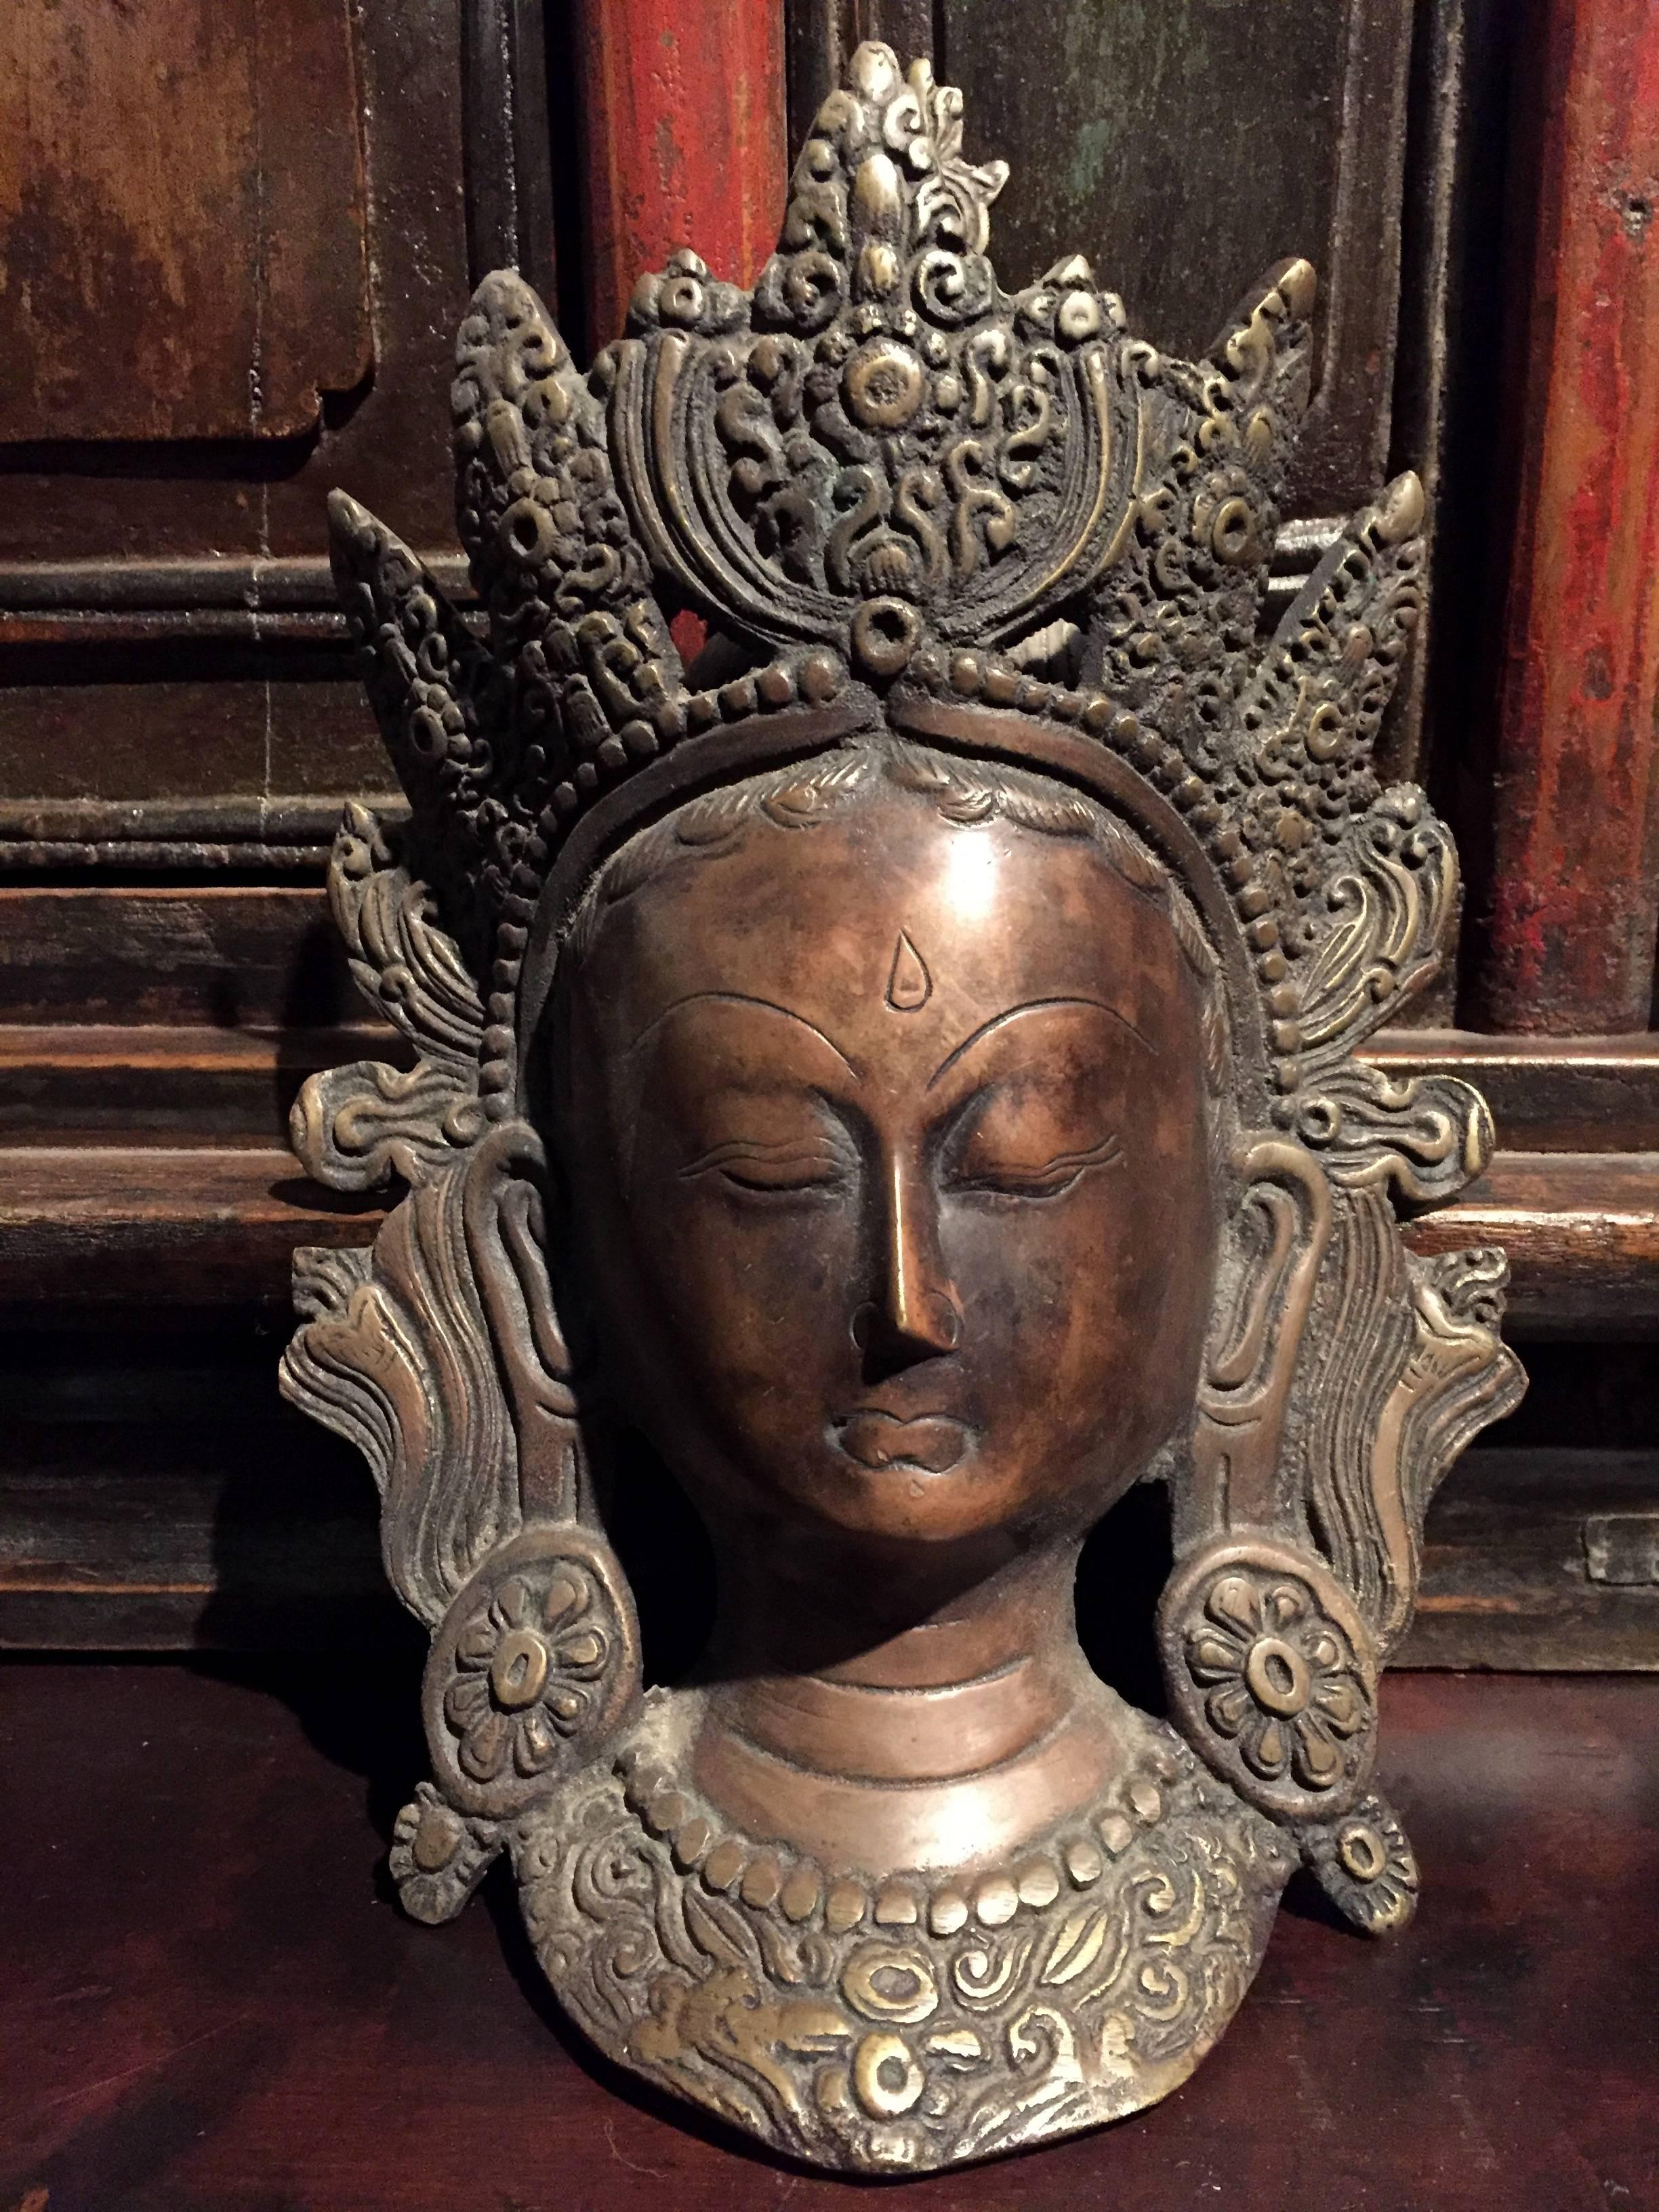 The Tara is a Tibetan Goddess of Compassion. This wonderful bronze sculpture depicts the deity in the most serene state of her presence. Such emotion is expressed through the definition of nose, elevated eyebrows, closed eyes and pursed lips. The